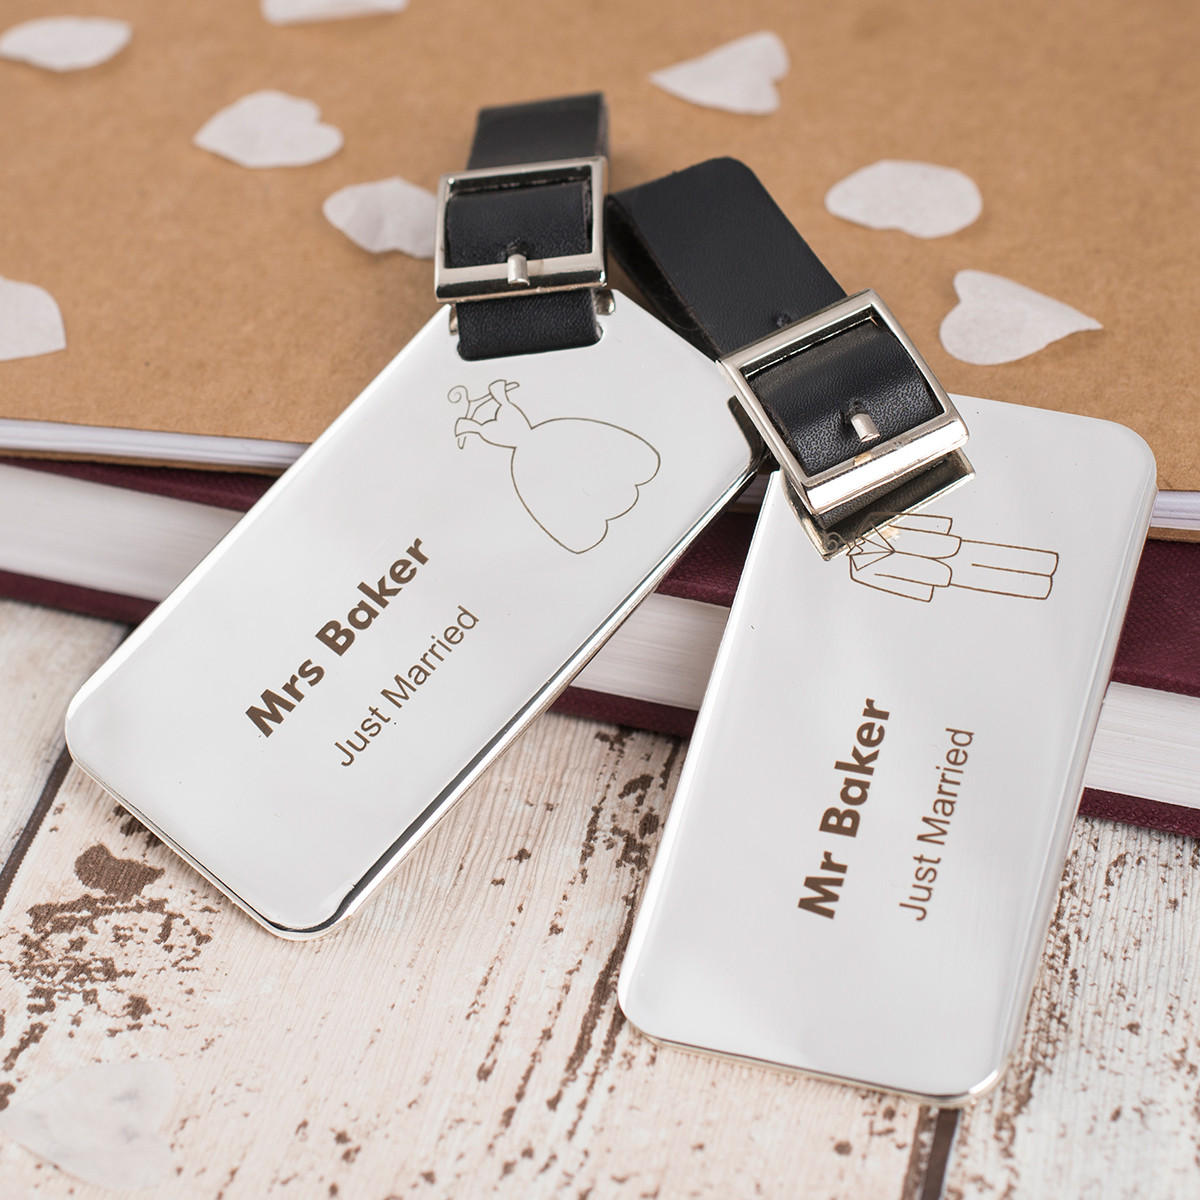 Wedding Gift Ideas For The Couple
 Wedding Gift Ideas For Couples Who Have Everything